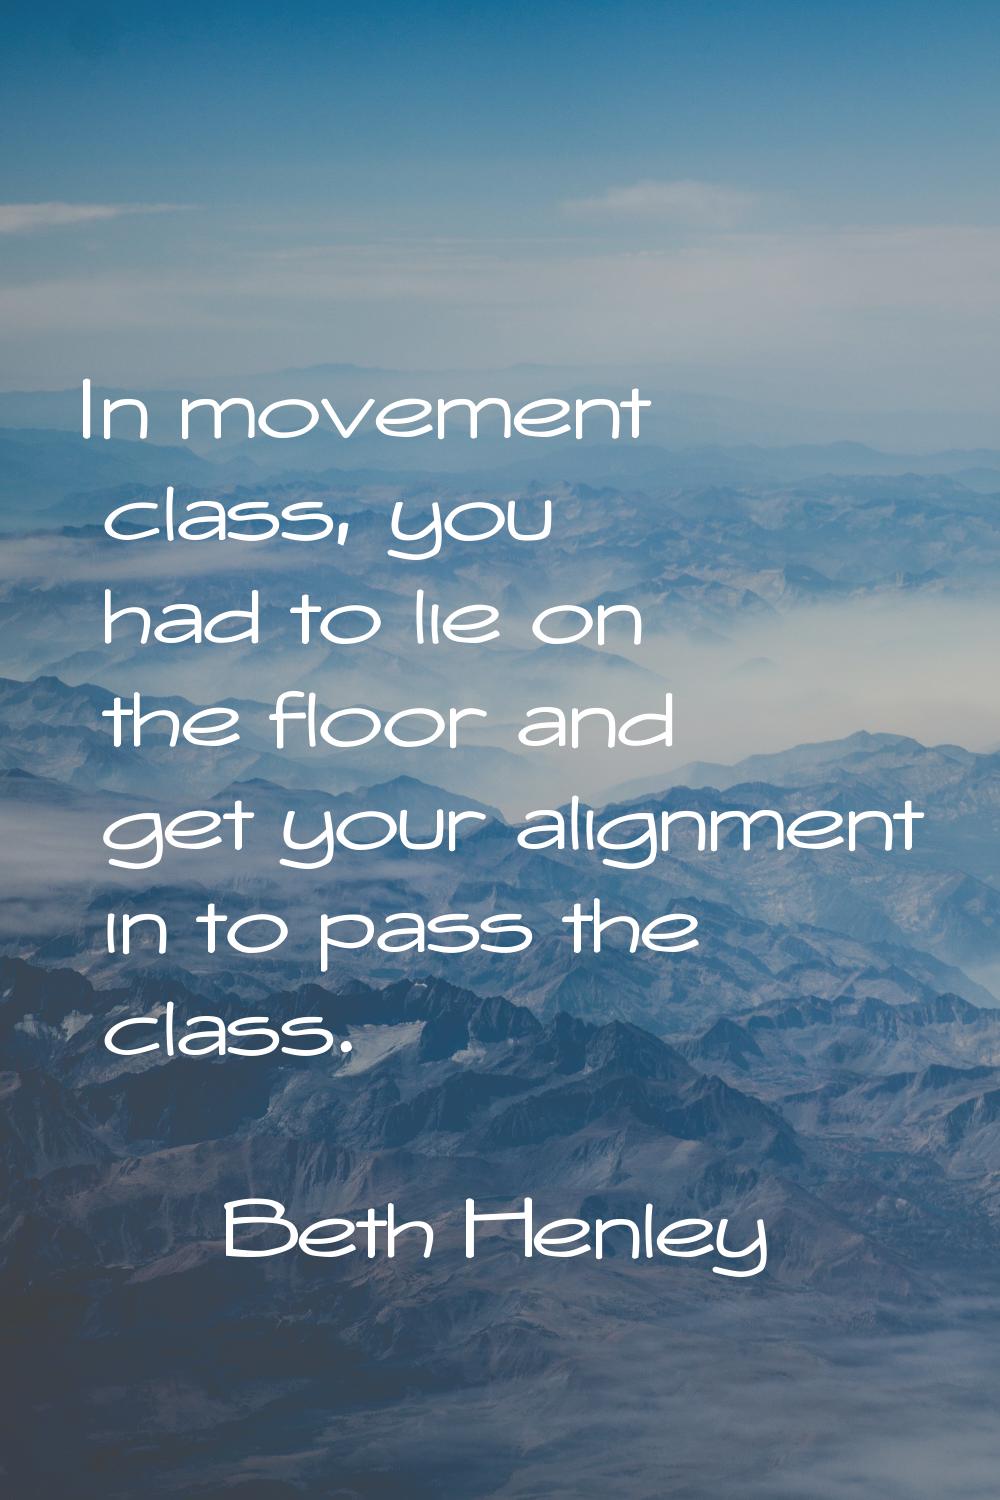 In movement class, you had to lie on the floor and get your alignment in to pass the class.